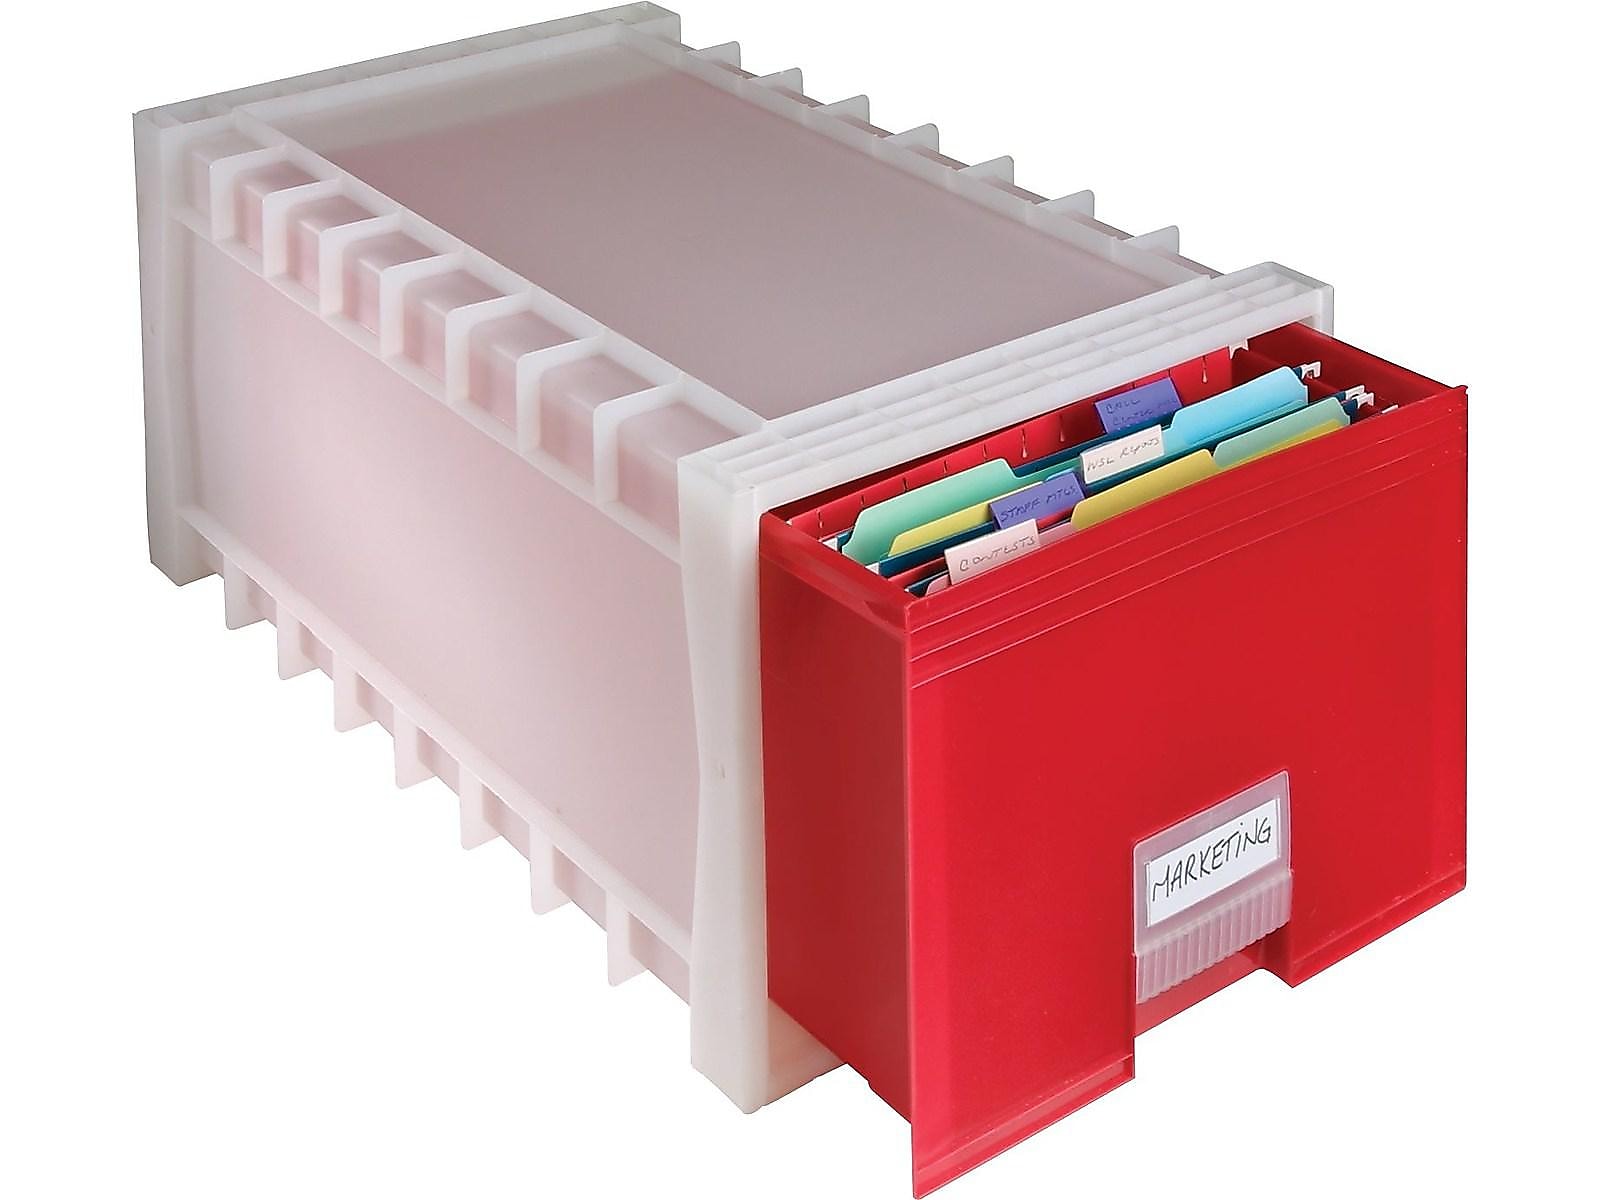 Storex  Plastic Archive Storage Box with Letter & Legal Size & 24 in. Drawer, White & Red - image 3 of 3